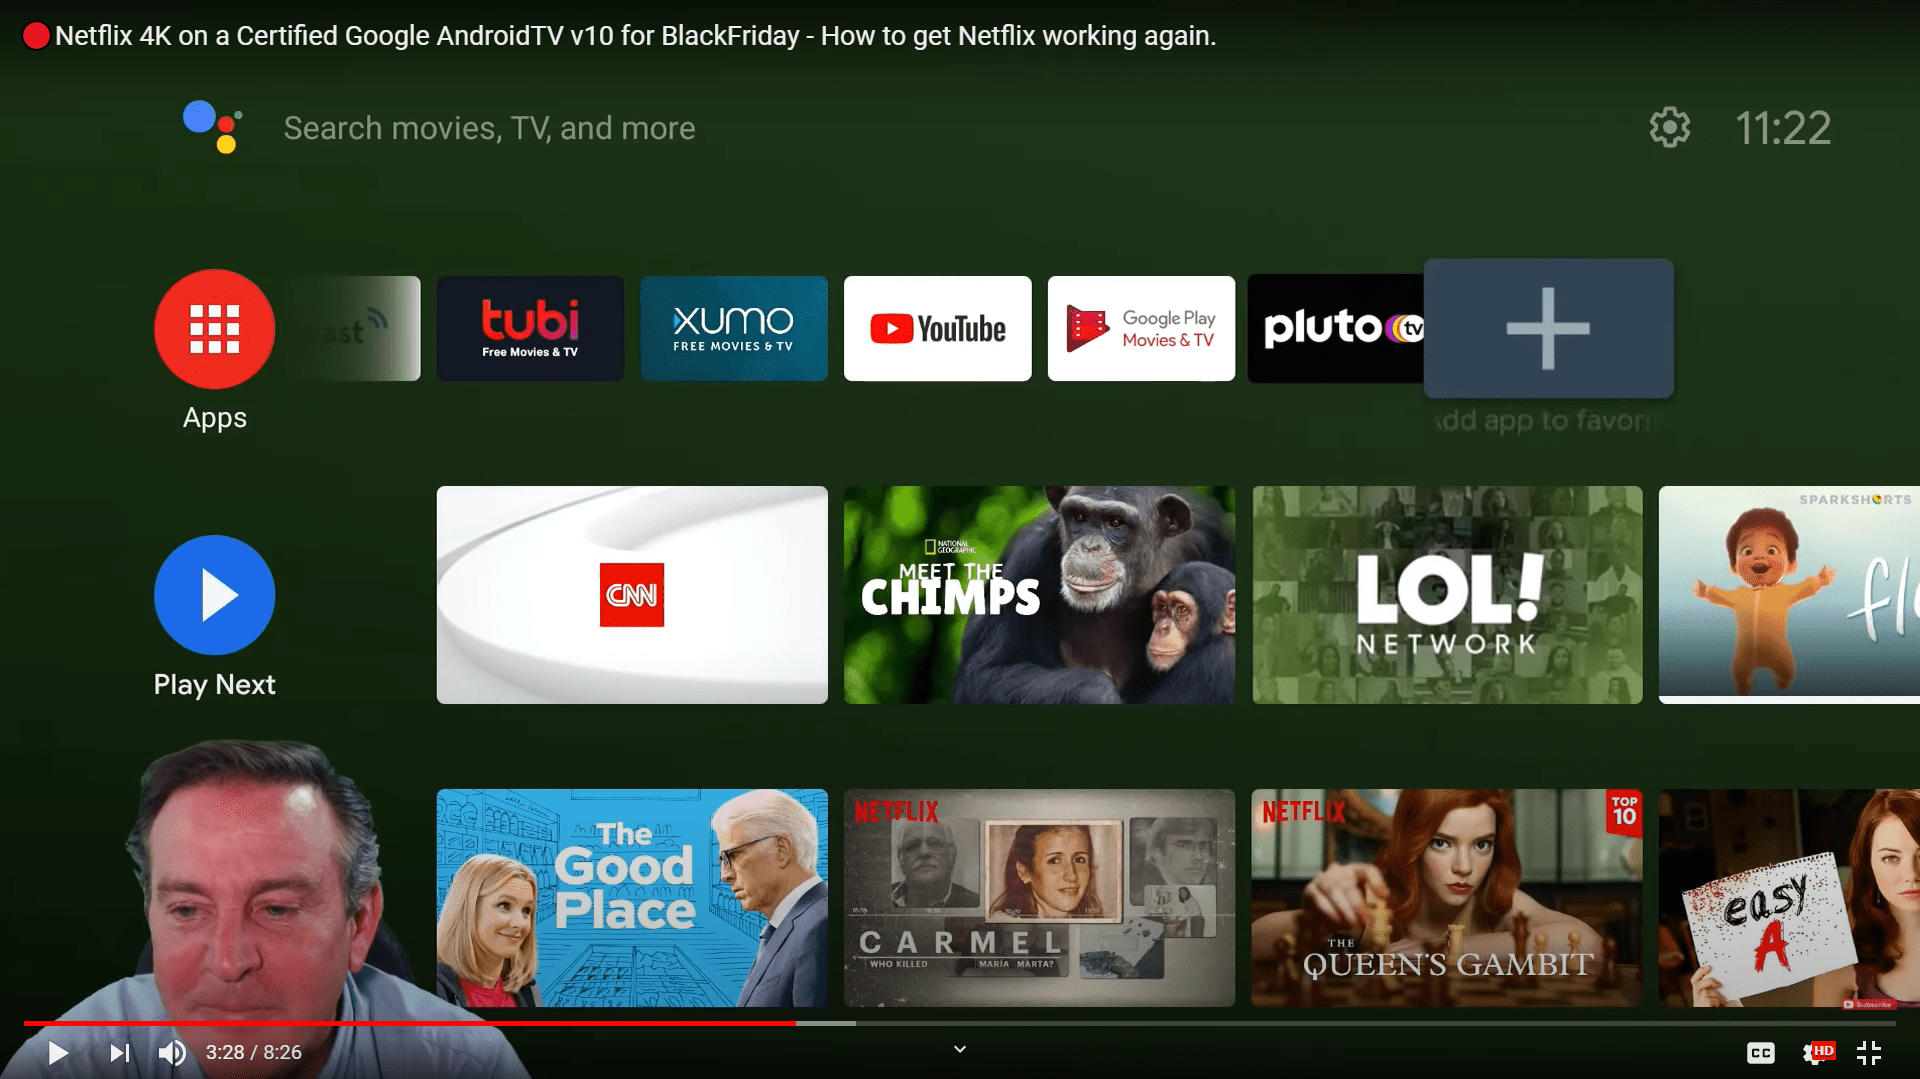 Netflix 4K on a Certified Google AndroidTV v10 for BlackFriday - How to get Netflix working again. - Dynalink